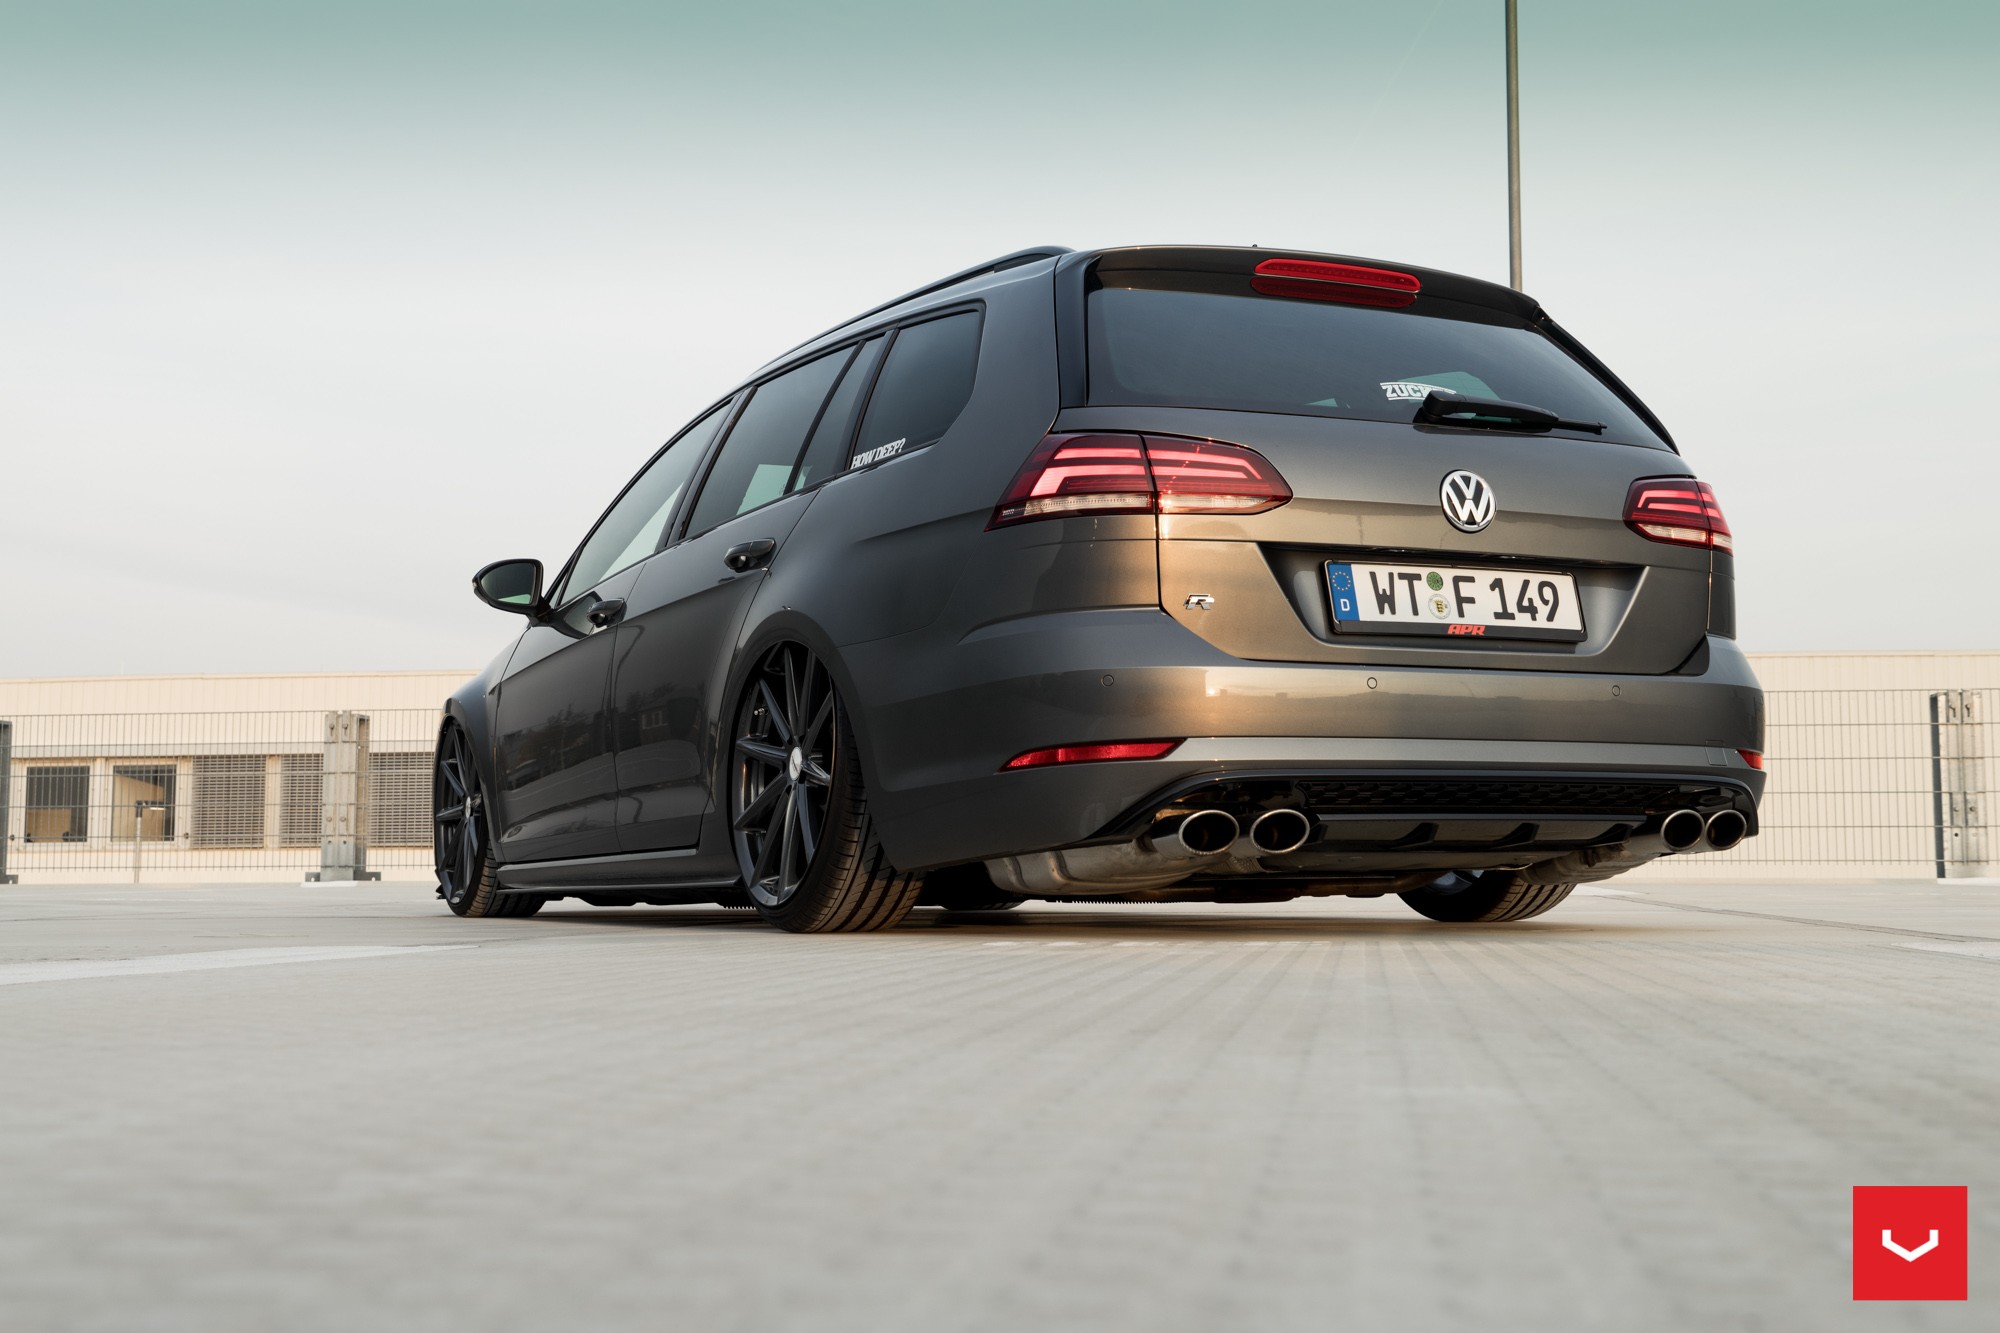 2017 Golf R Variant Gets Stanced on Vossen Wheels for Tuning Debut -  autoevolution